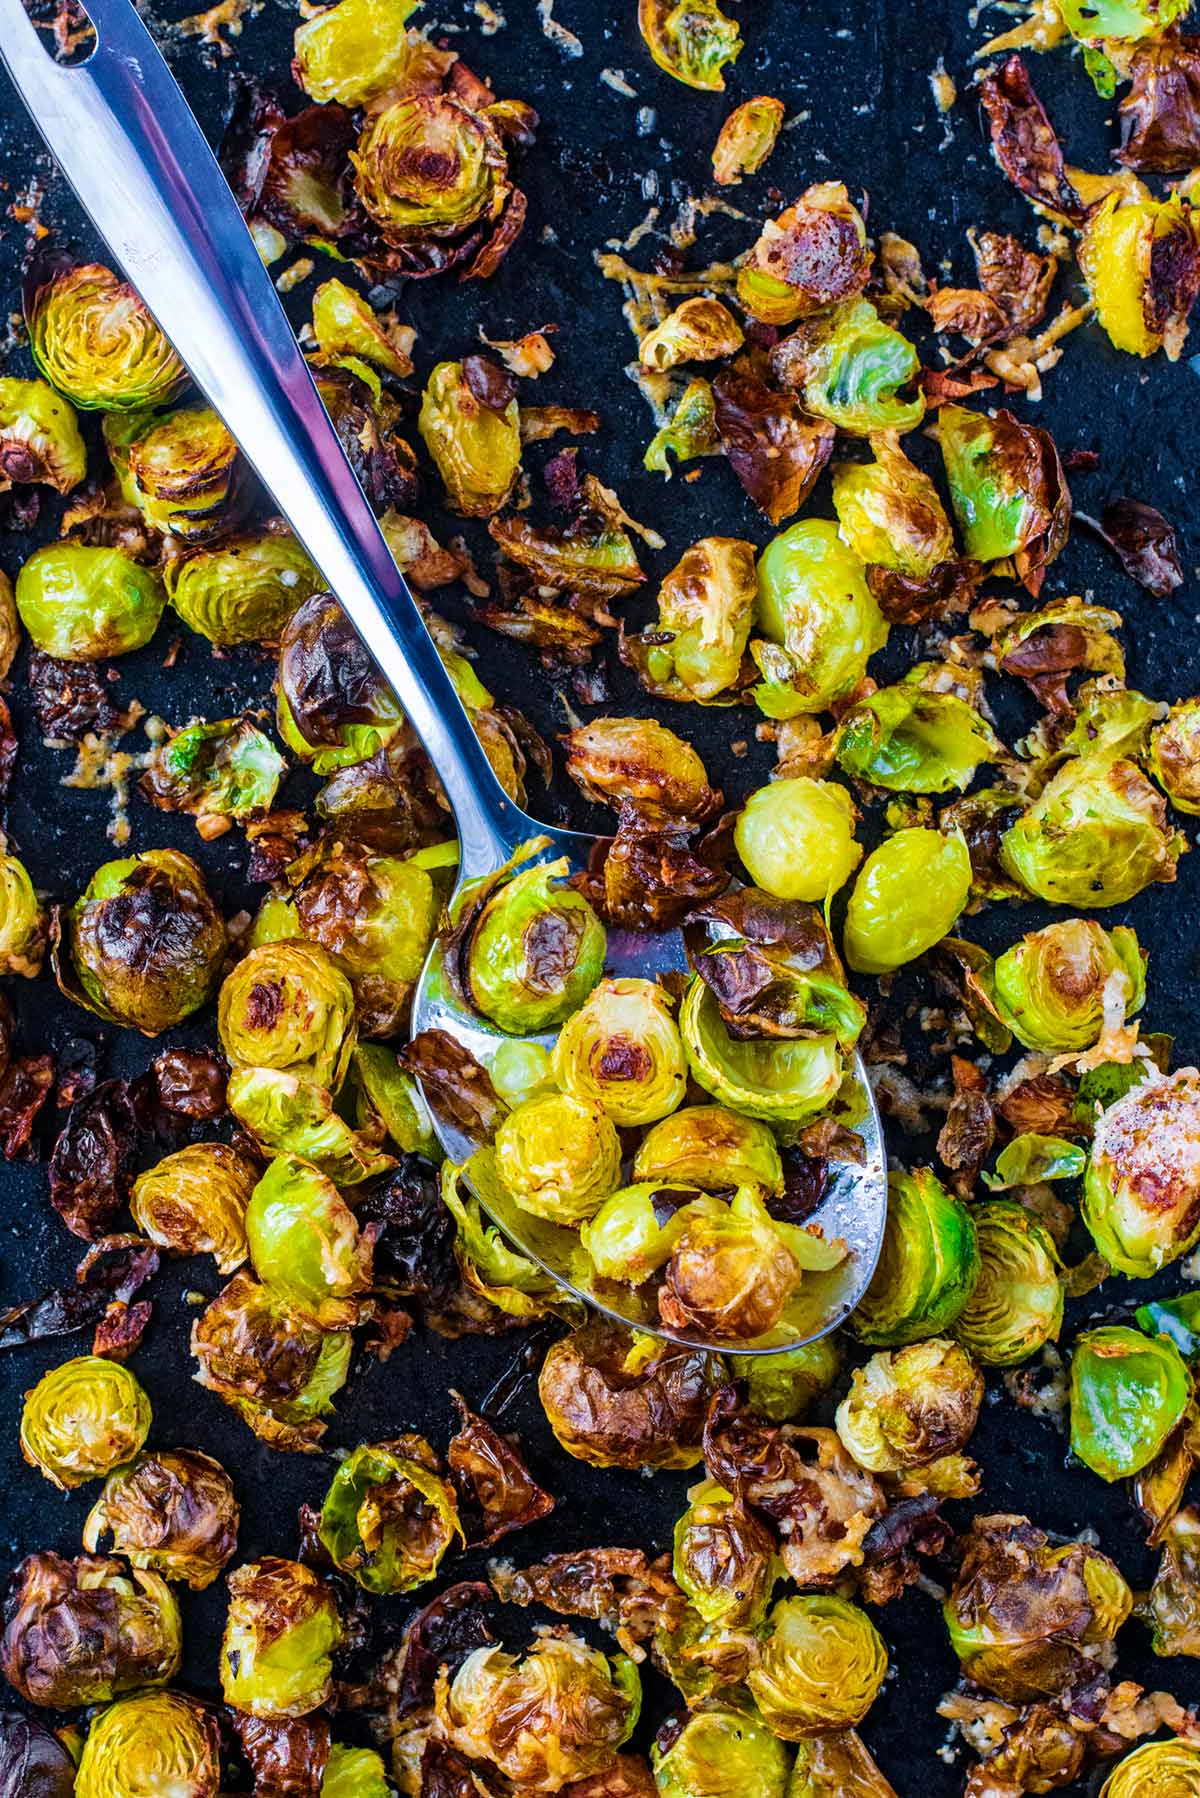 A baking tray covered in cooked Brussels sprouts with a large serving spoon.